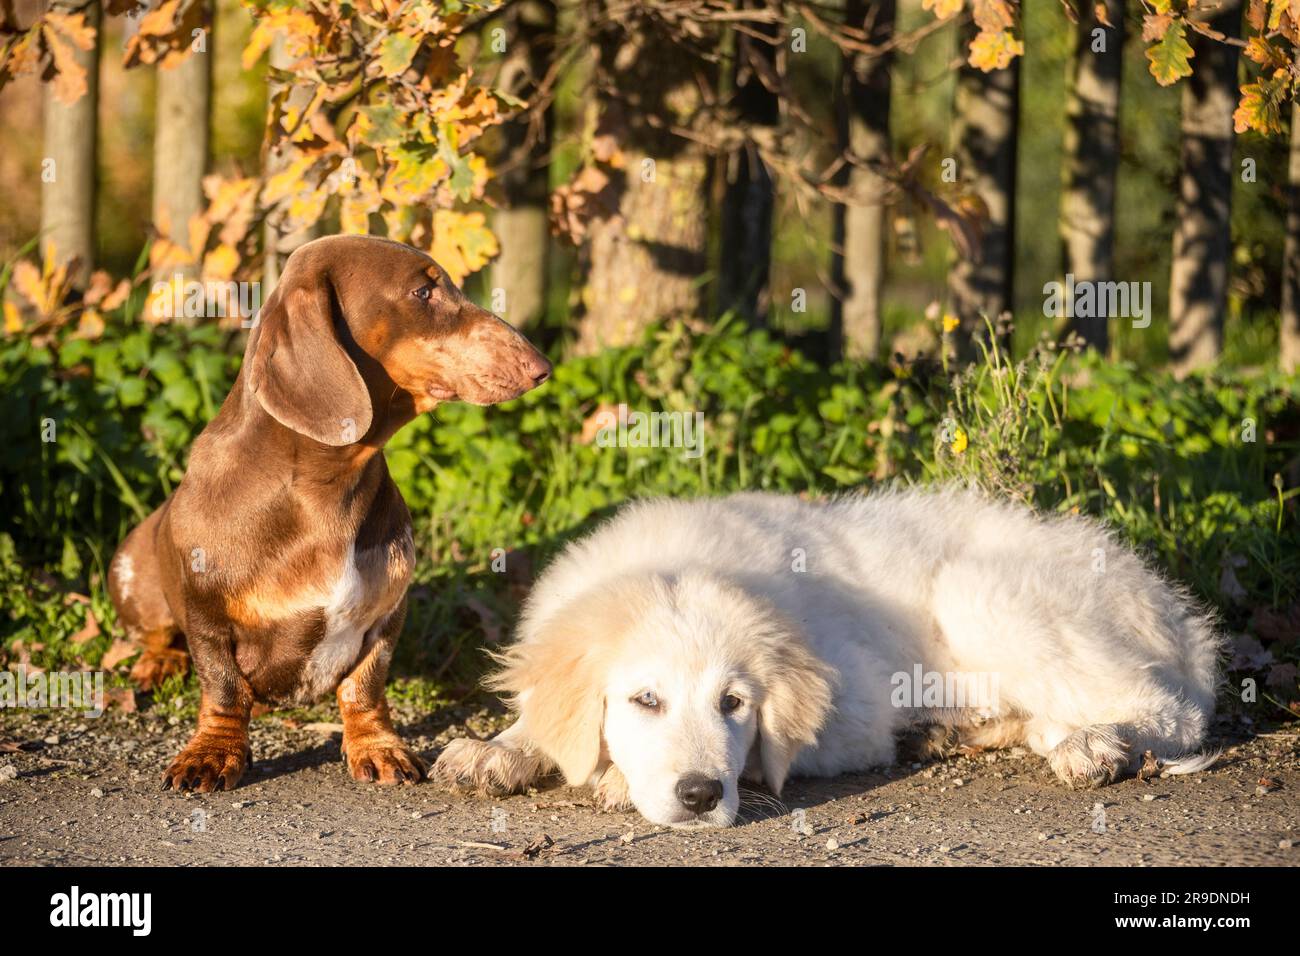 Short-haired brindle Dachshund and Kuvasz puppy in front of a garden fence. Germany Stock Photo